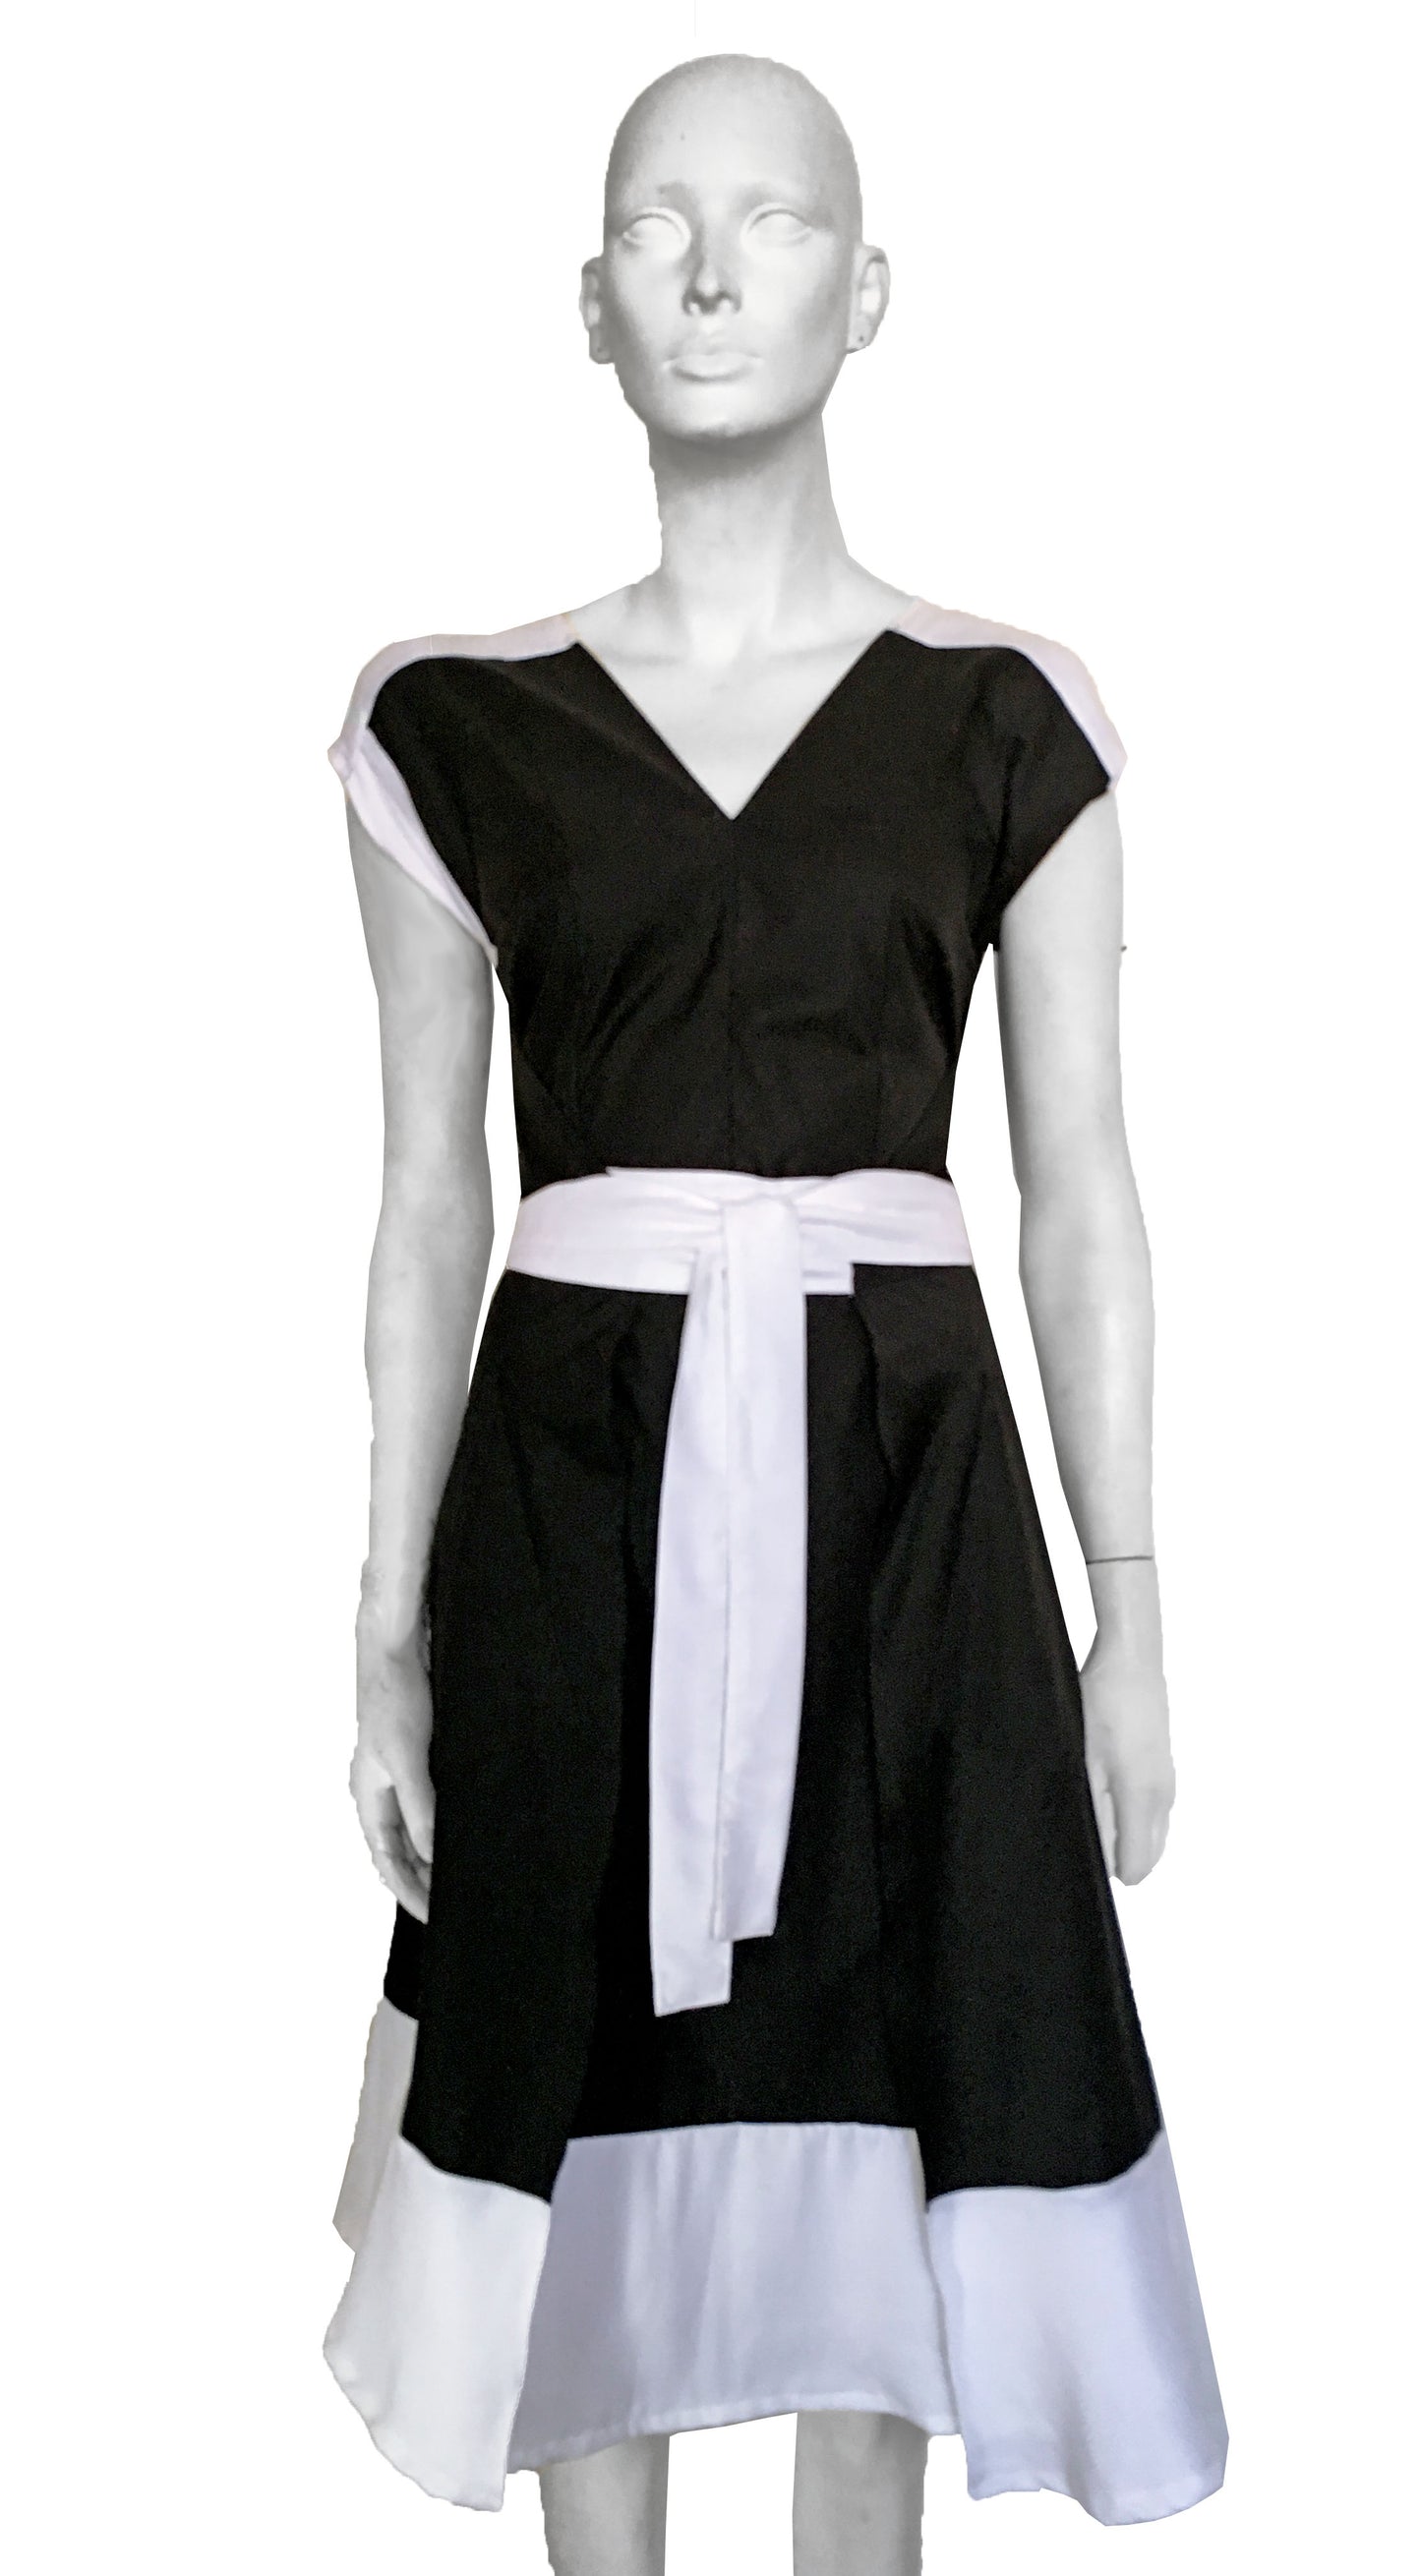 Wrap dress, two fronts, with white shoulder yoke and skirt.